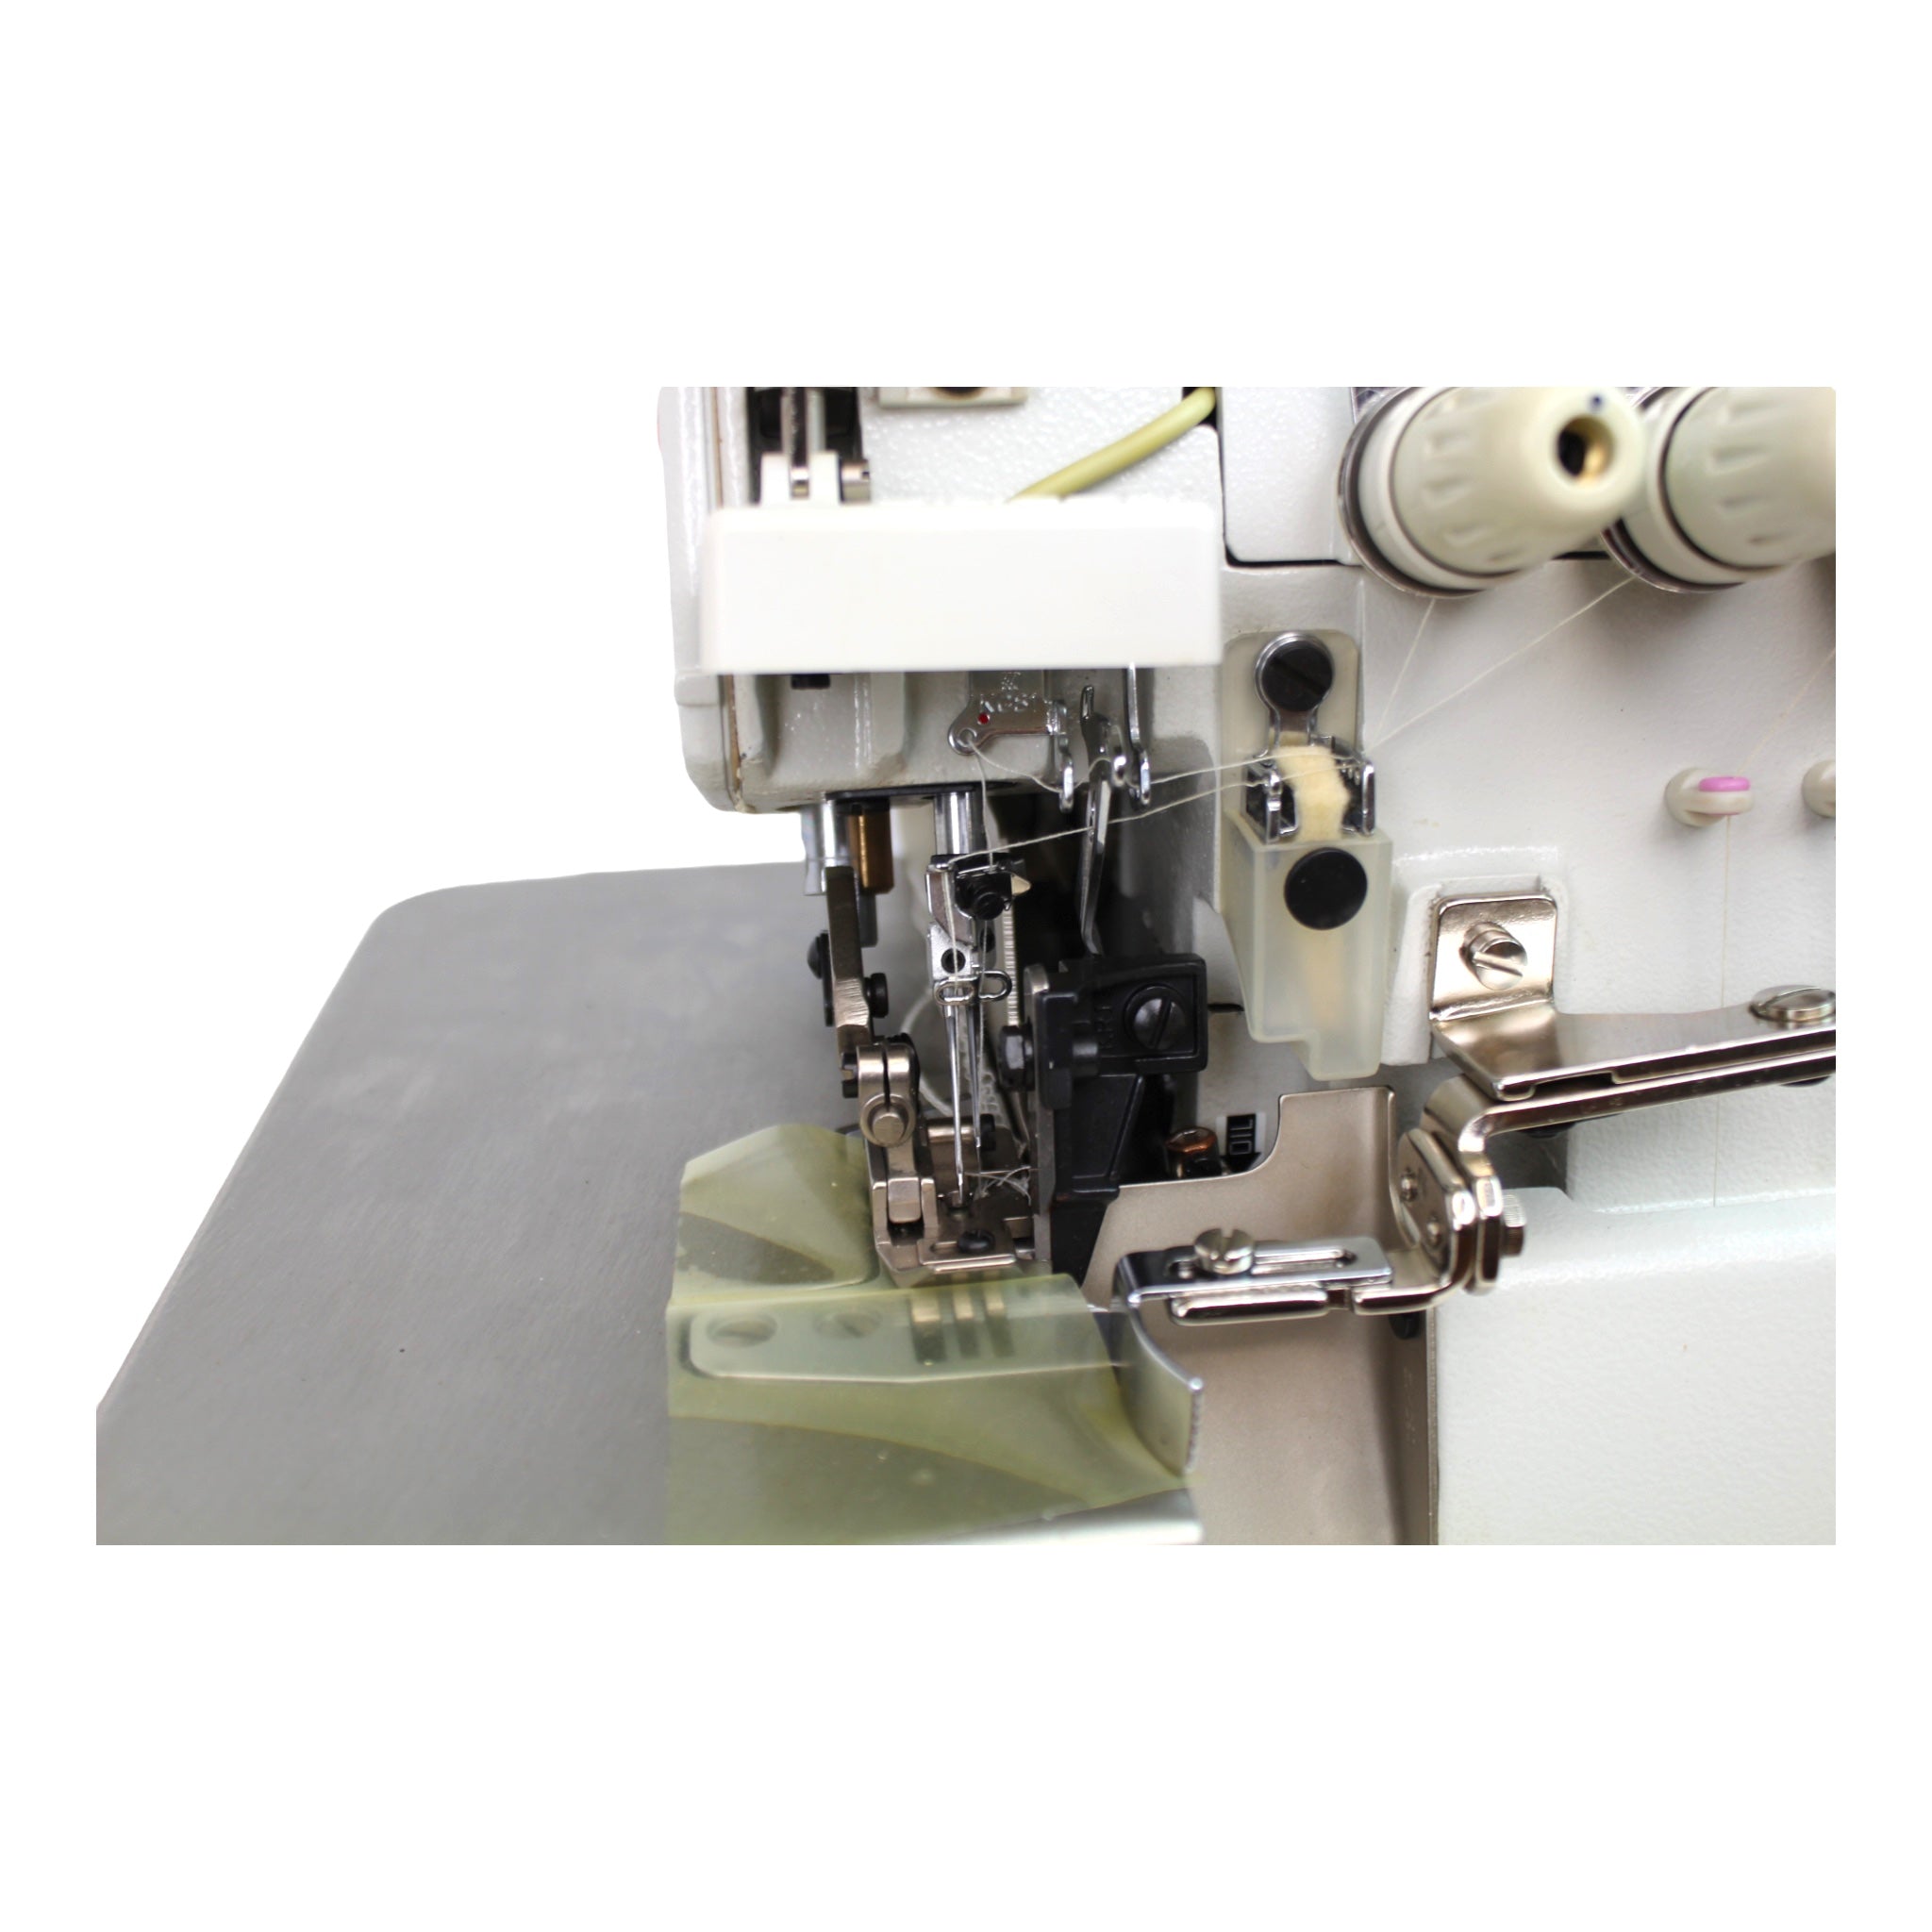 SIRUBA 757H-516M2-35 5 Thread Overlock Industrial Sewing Machine Assembled with Servo Motor, Fully Submerged Table Setup